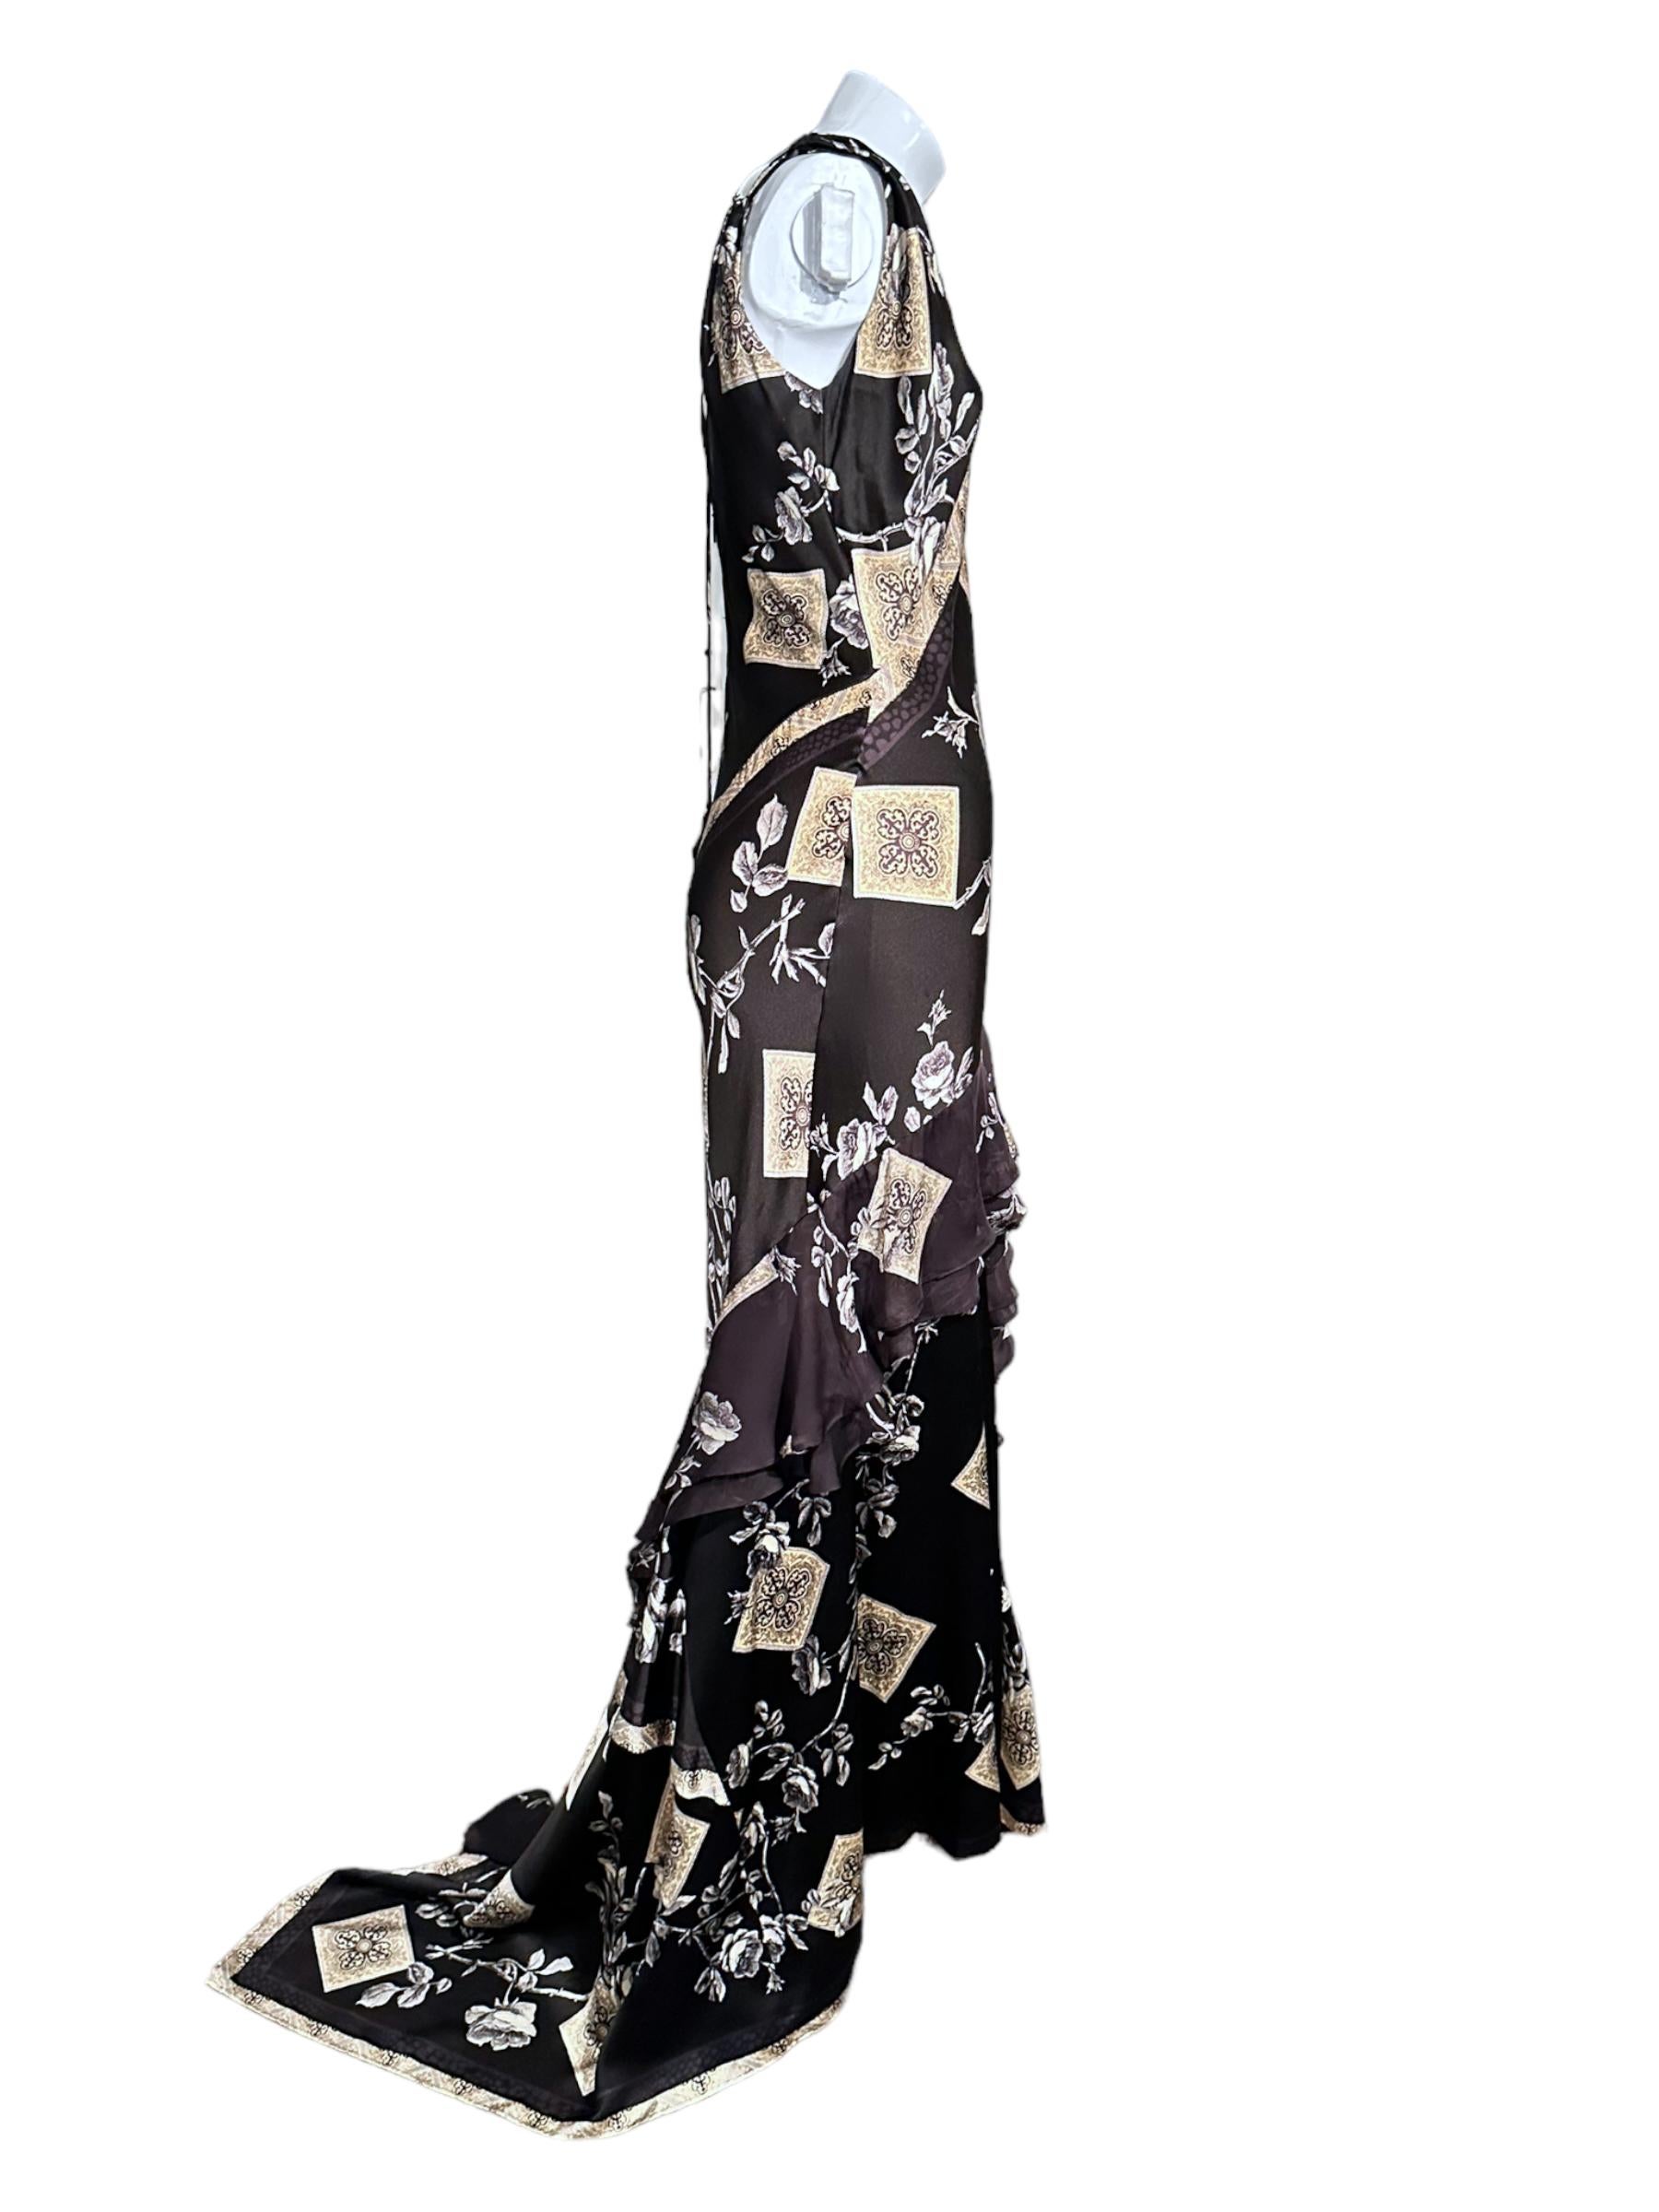 Women's ICONIC FW 2005 Roberto Cavalli Chinoiserie Print Black and Gold Silk Bias Gown For Sale